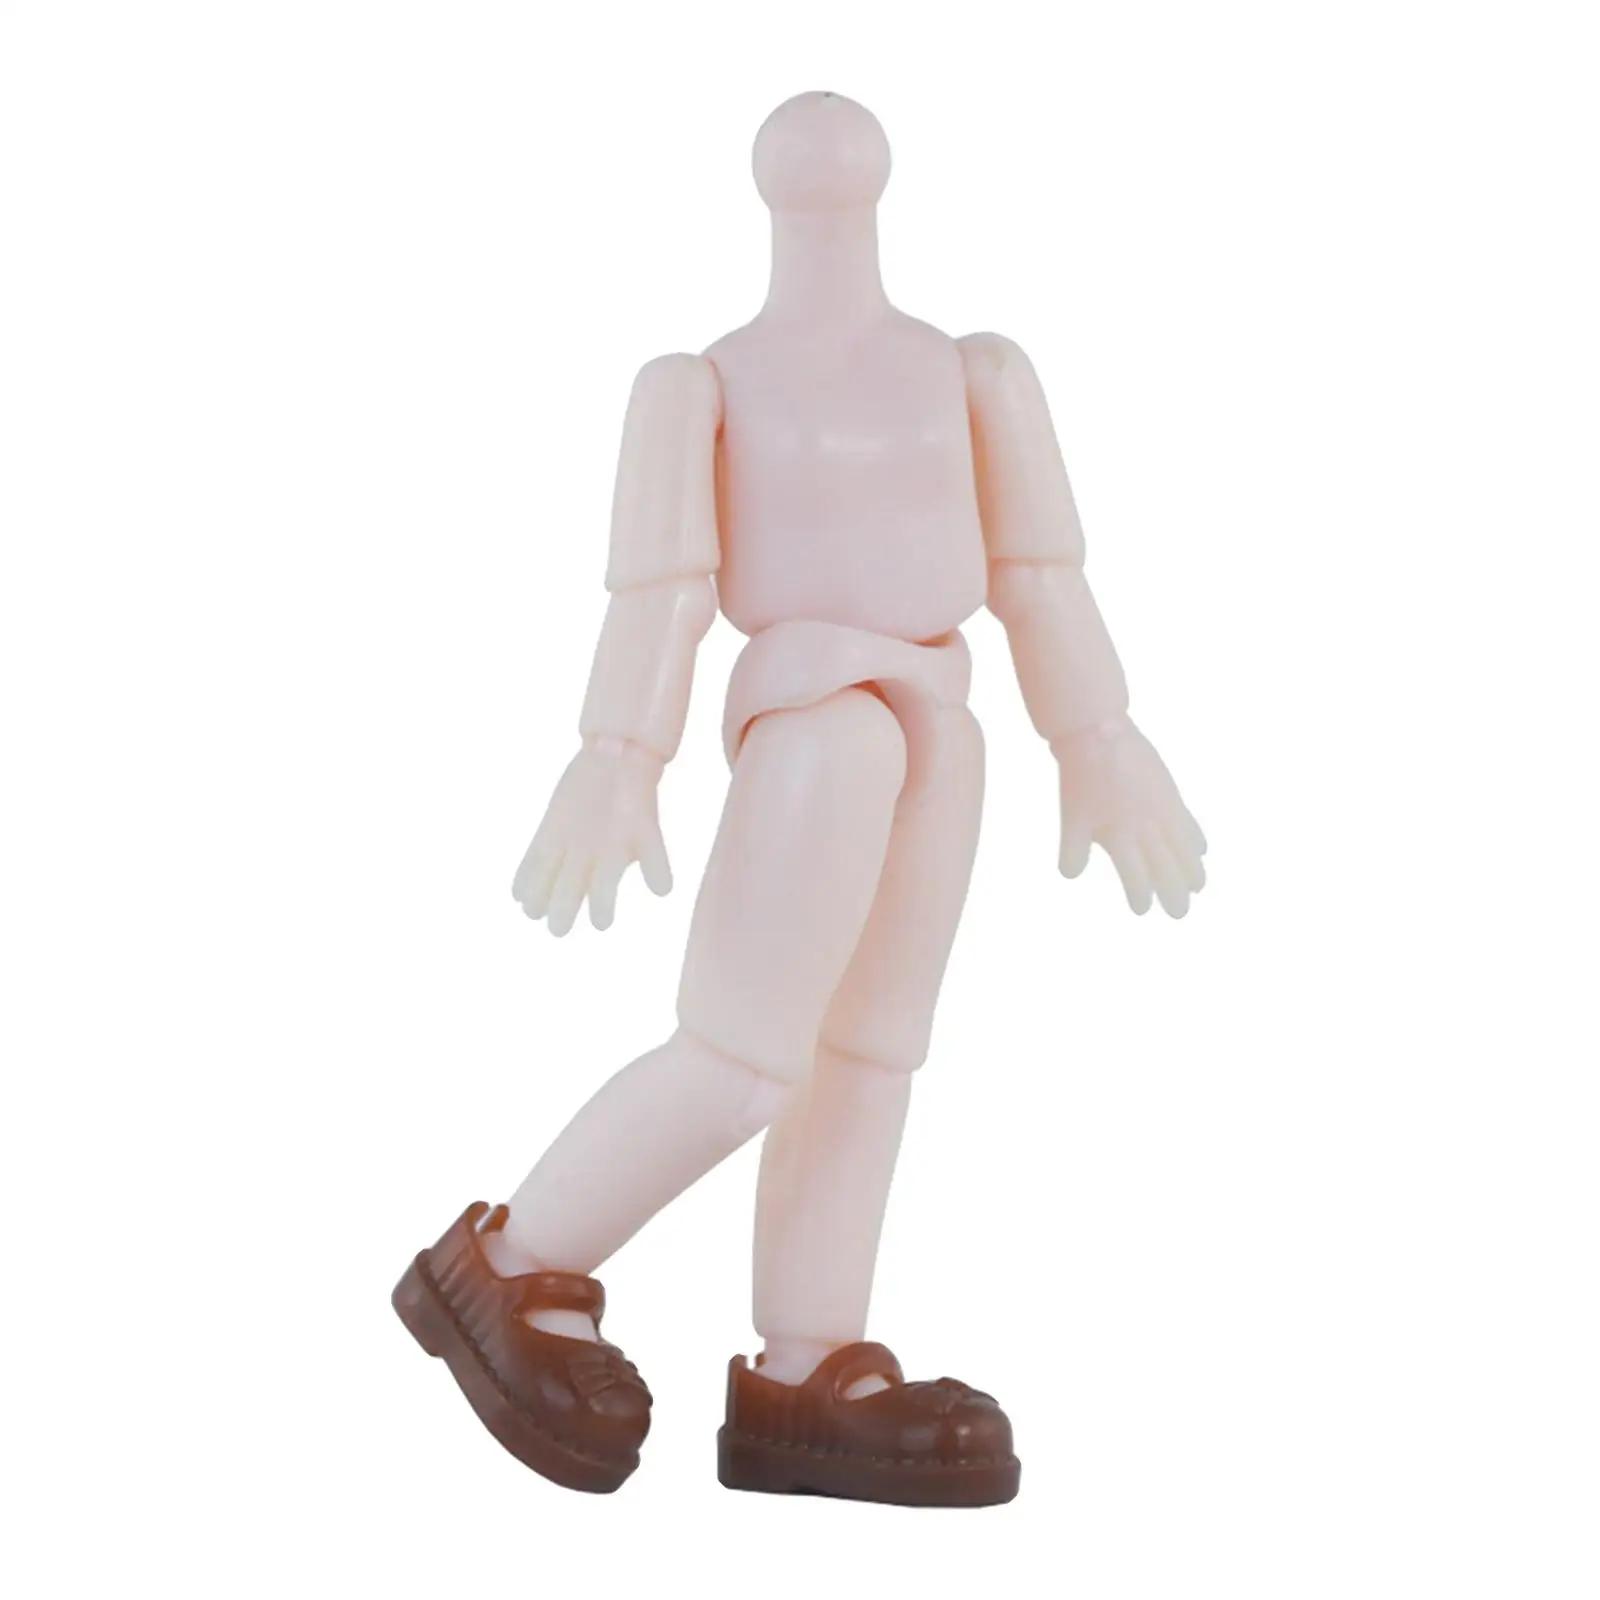  Doll Body Model Ob11 Gift Parts Moveable Figure Action Boys